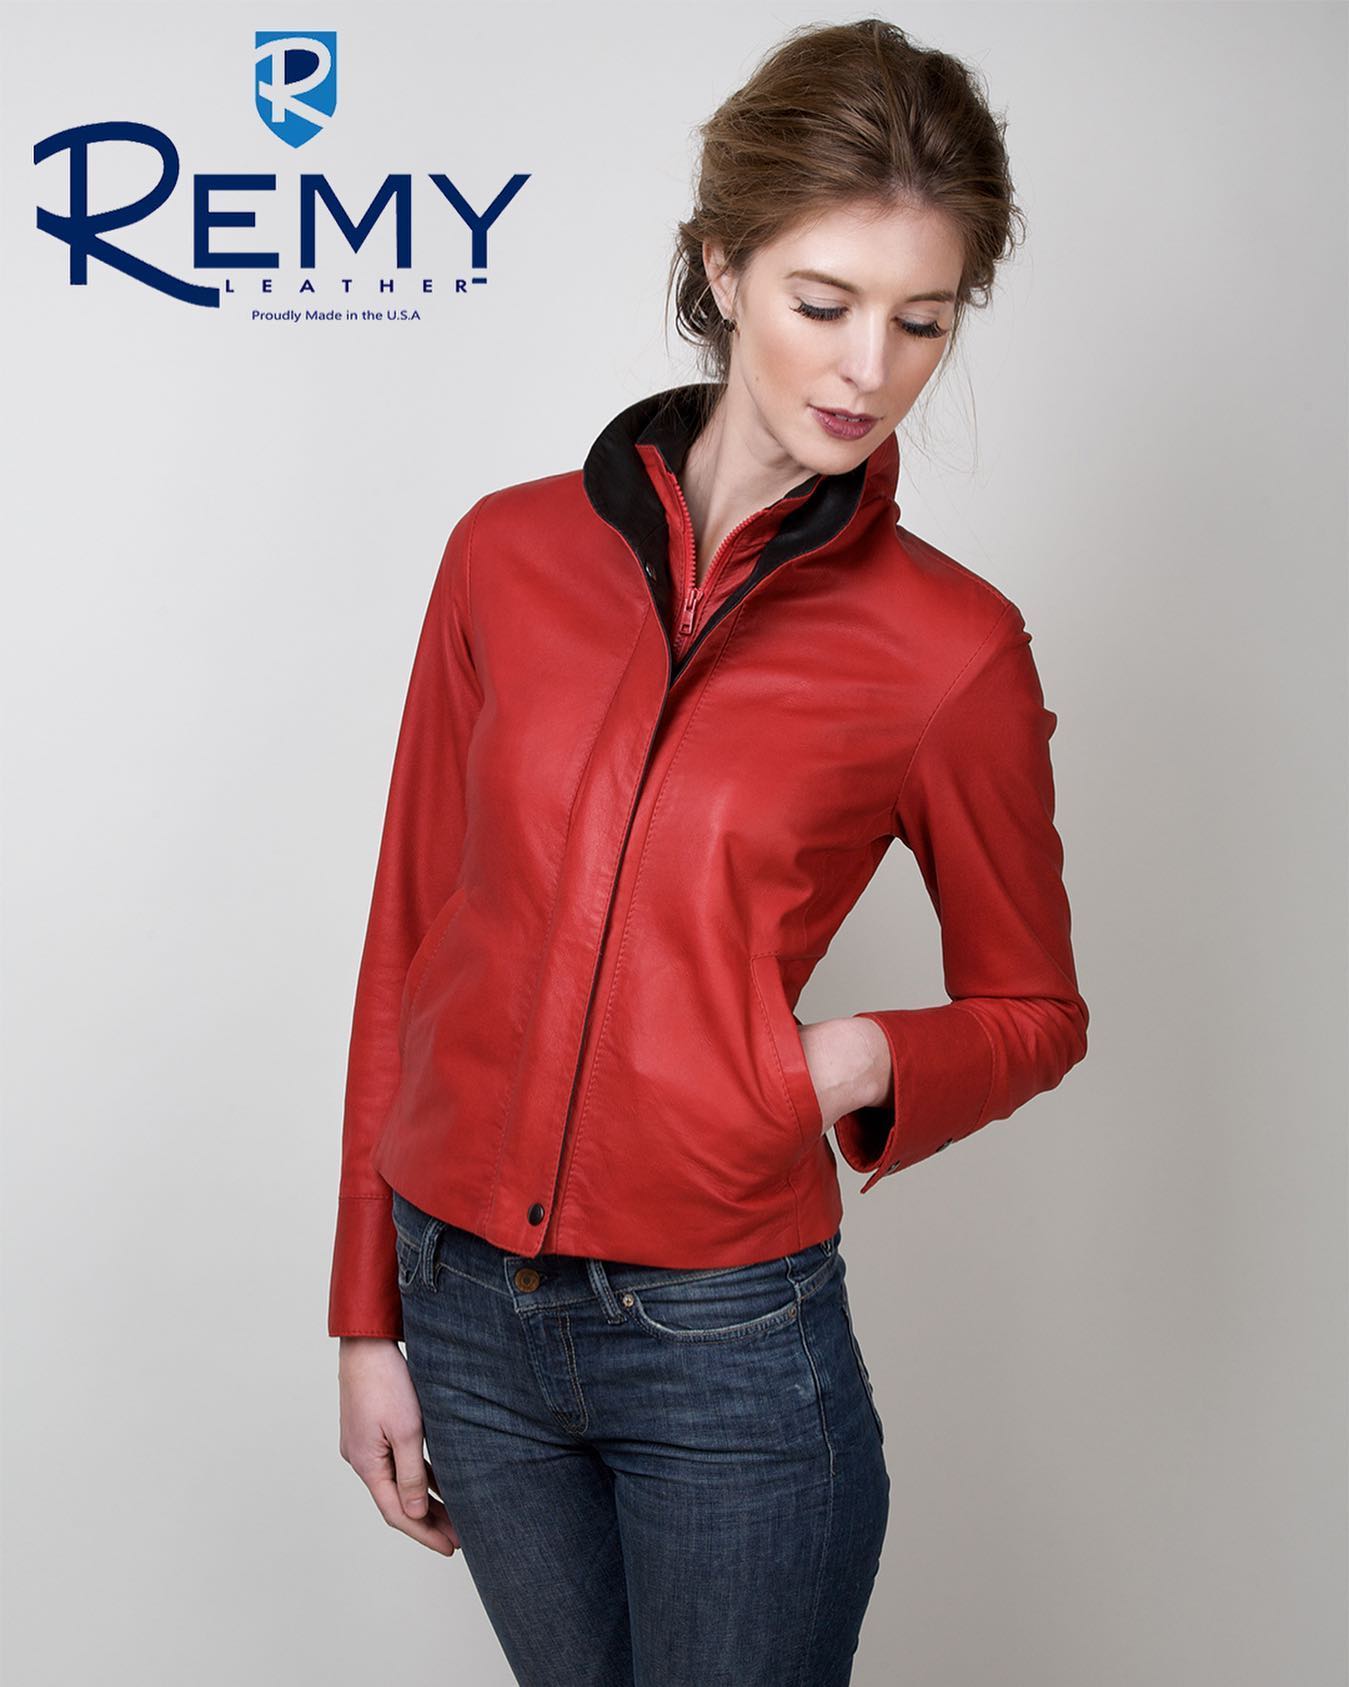 Double (Sausalito) Collar Pegasus Leather Leather Women\'s Red – Light Remy